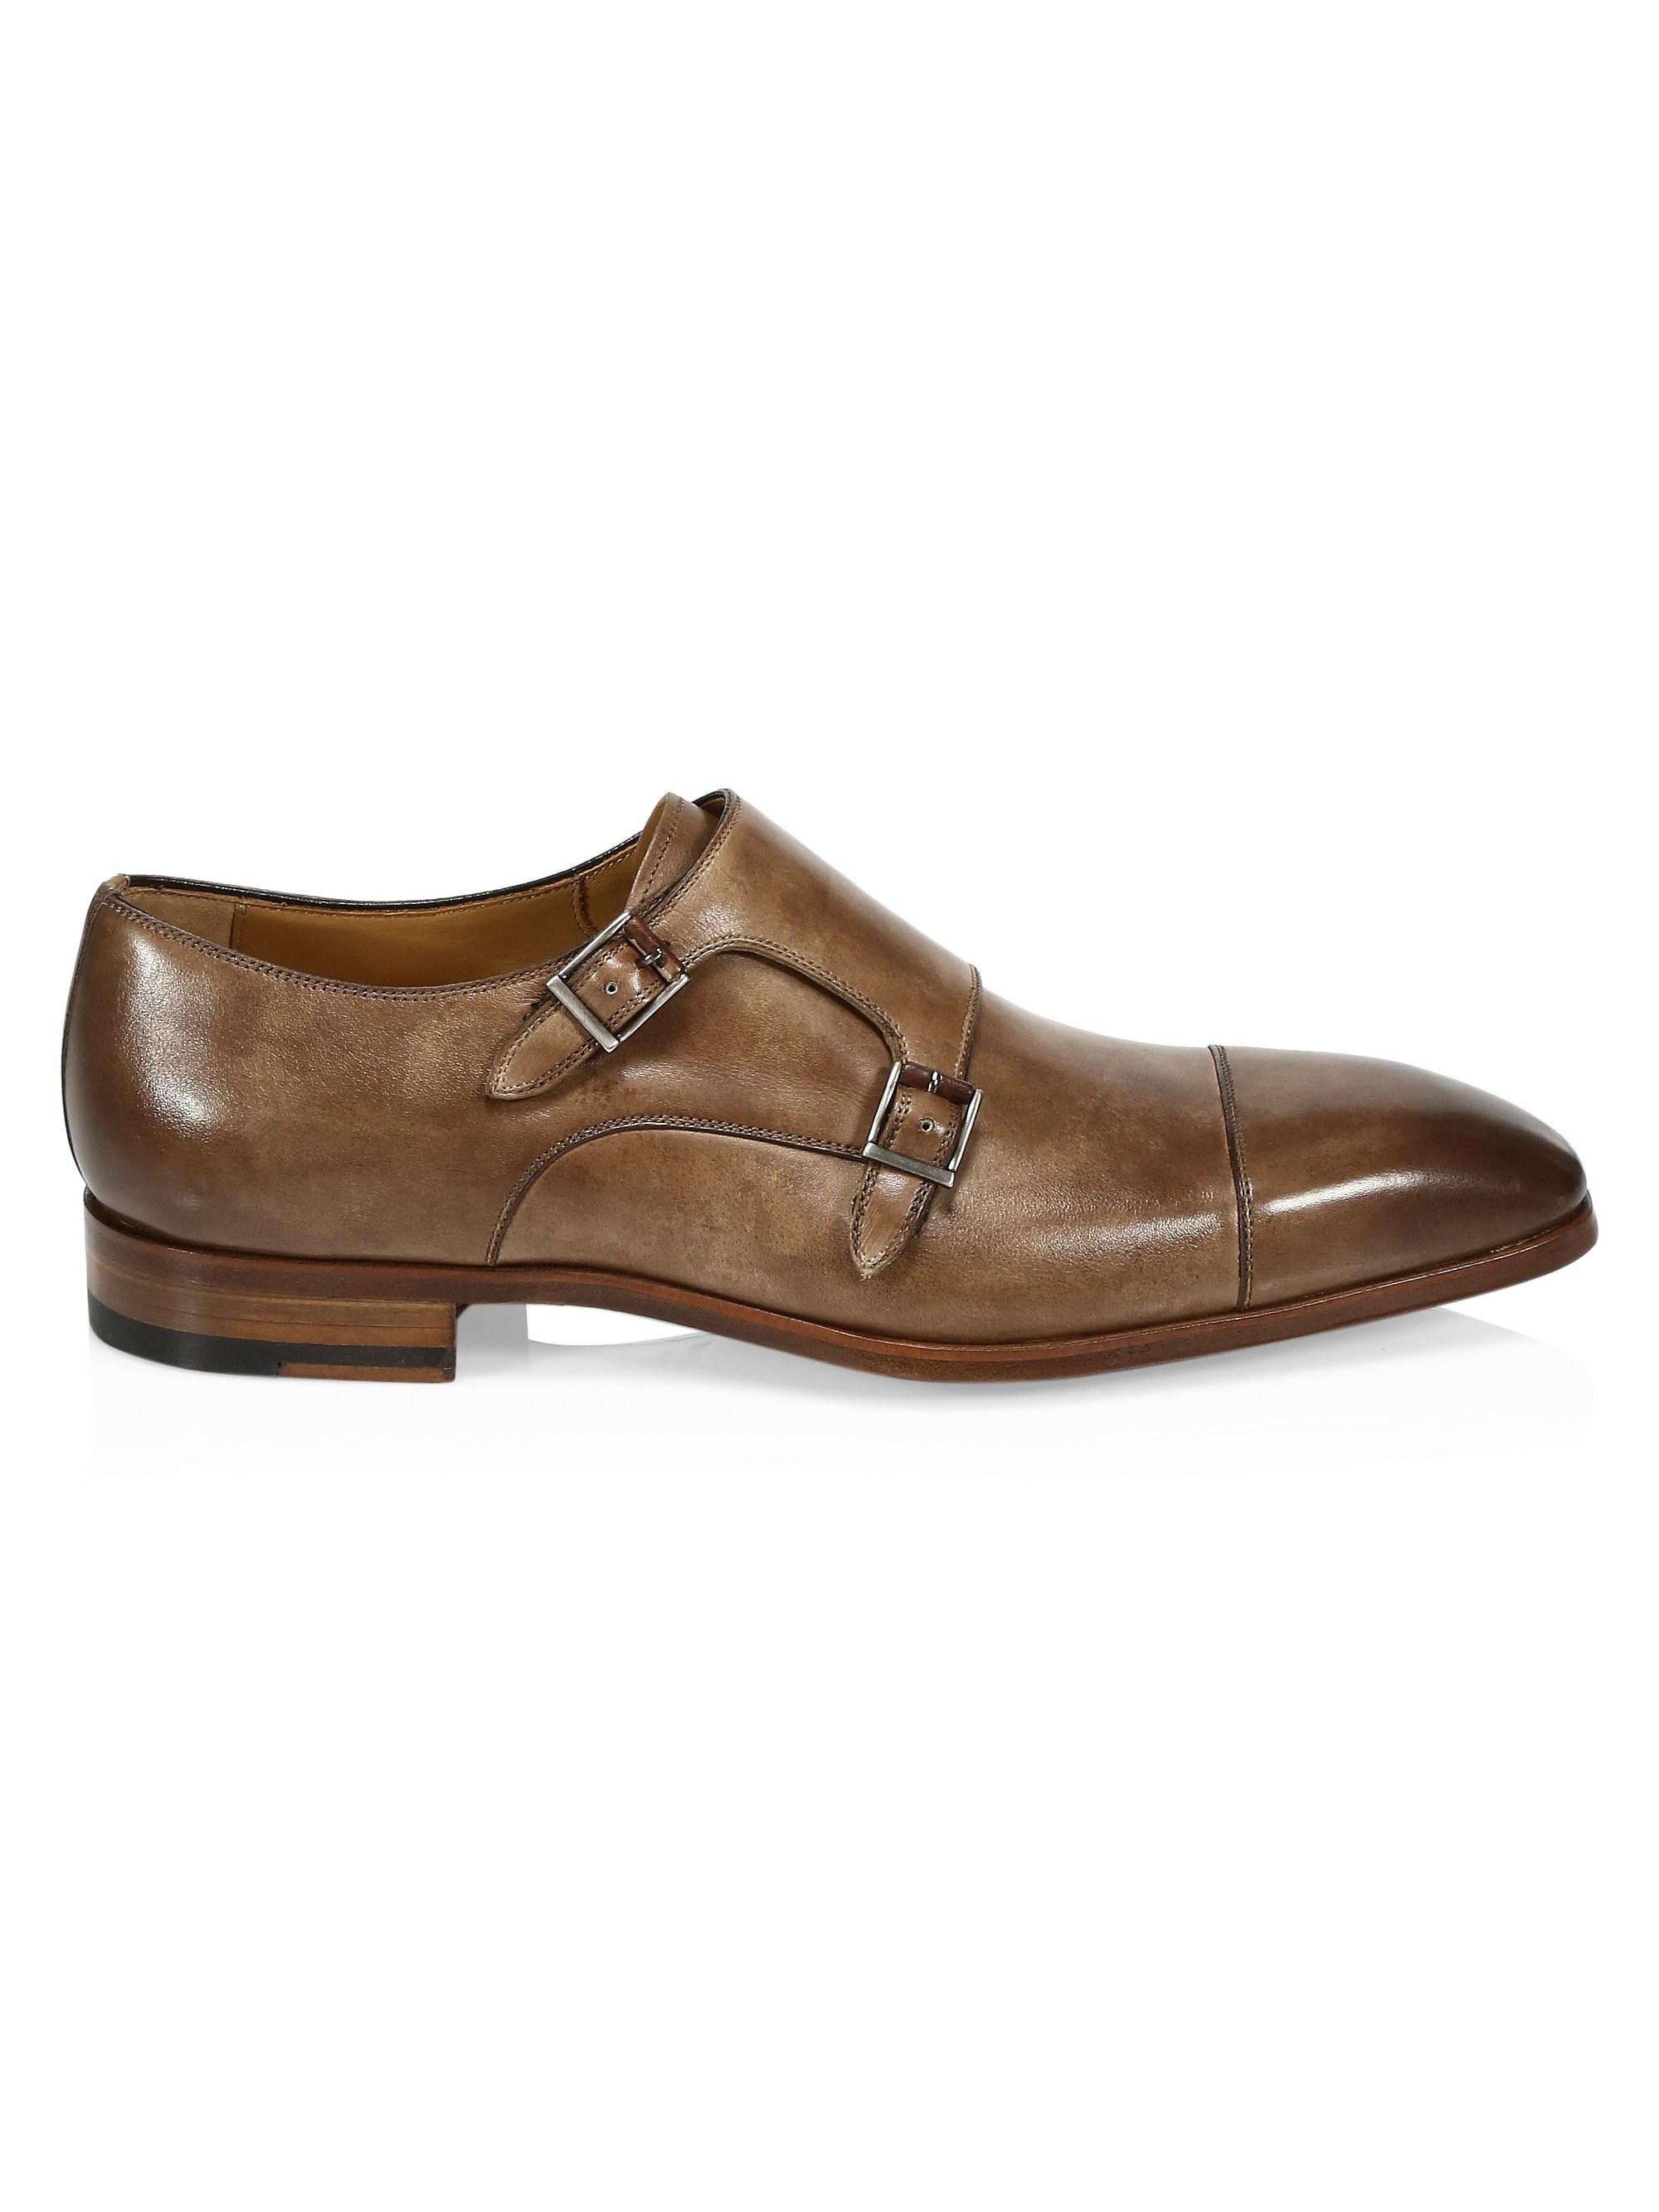 Saks Fifth Avenue Collection Burnished Leather Double Monk Strap Dress ...